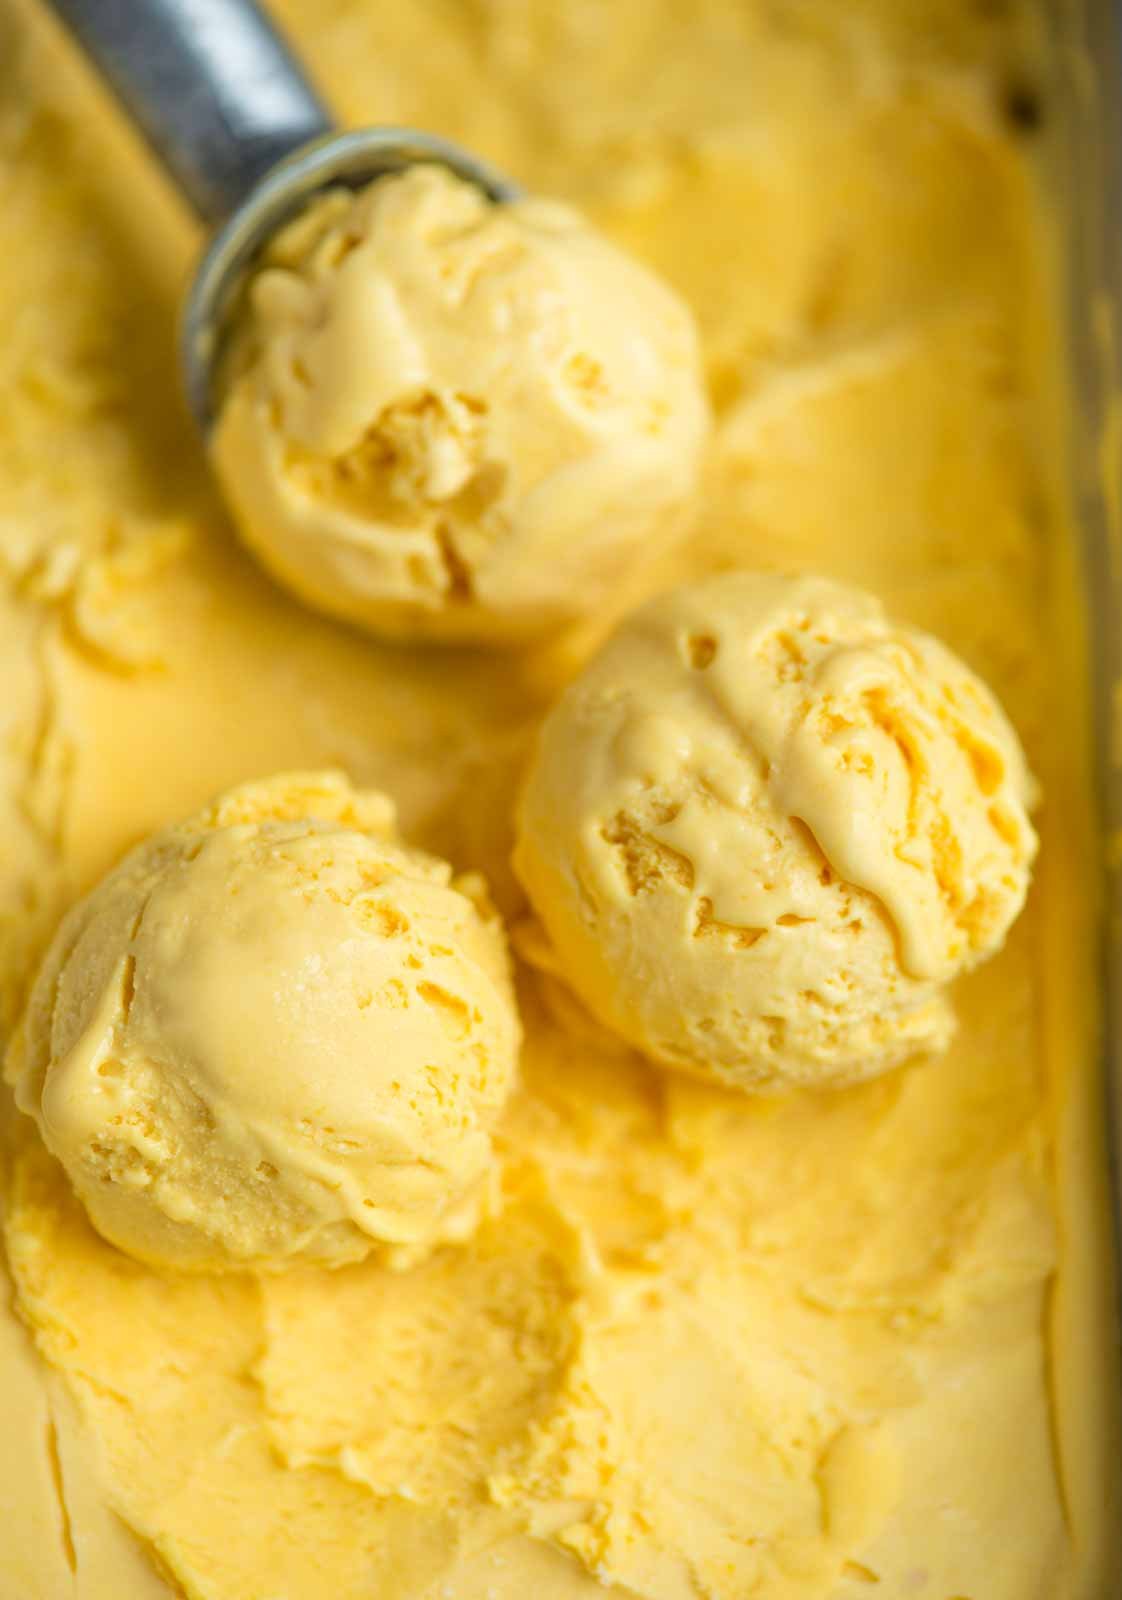 Mango Ice Cream is creamy and tastes better than a tub of store brought Ice cream. There is no artificial colour or flavour and you don't even need an Ice cream maker to make it. 
